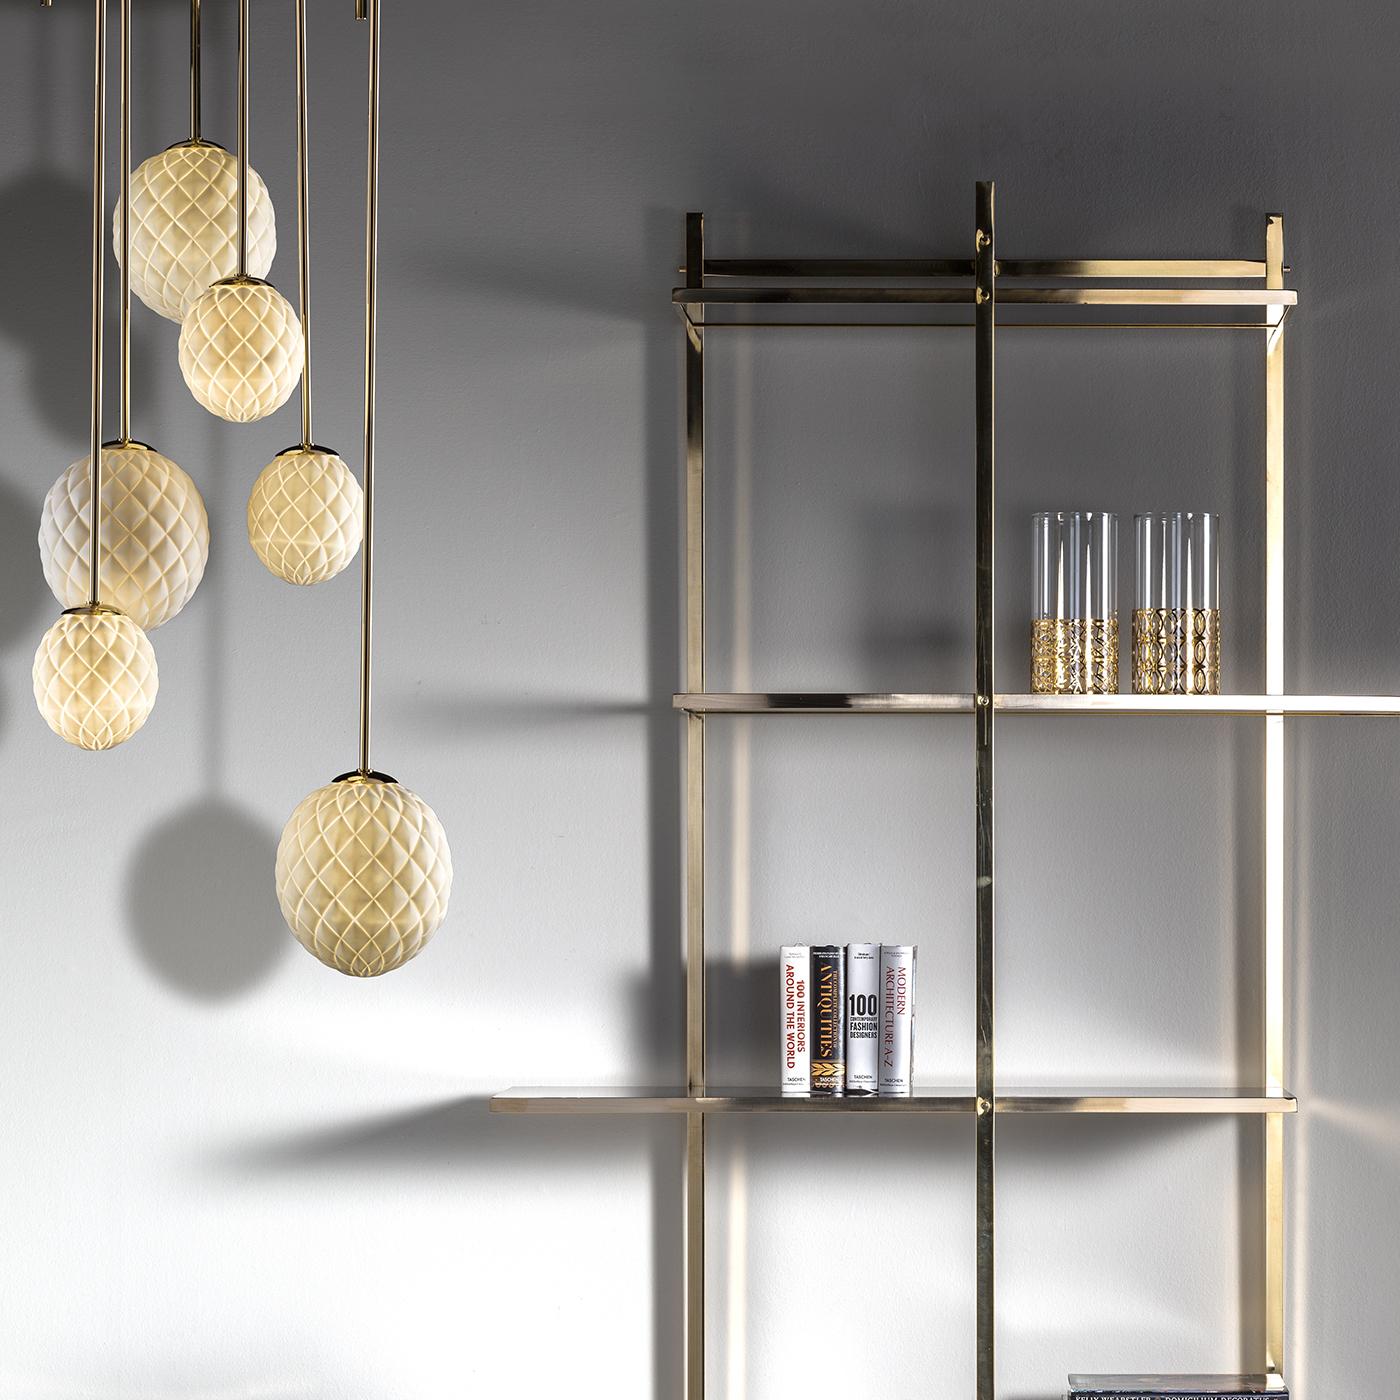 This superb bookcase is a striking decoration that adds a luxurious texture to a wall while providing ample display surface for books or collectibles. The brass structure is elegant and Minimalist, serving also as mounting for the lacquered wooden